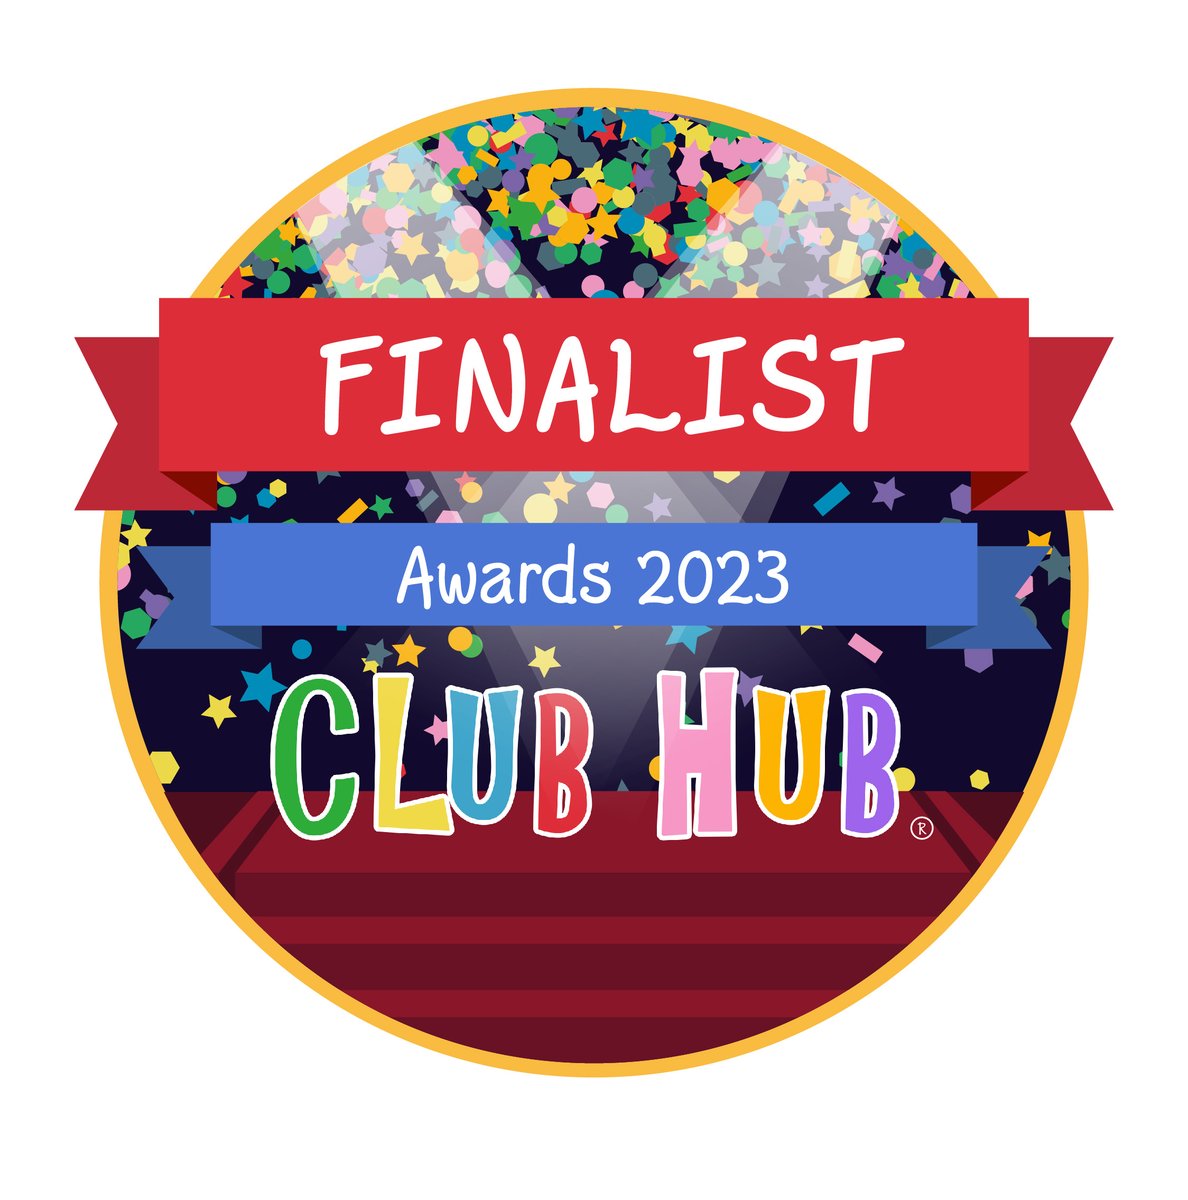 We're delighted to be finalists in this year's Club Hub awards for Franchisor of the Year (with over 15 franchisees)
Our fab franchisee, Helen, is also a finalist in 2 awards; Franchisee of the Year & Biggest Growth of the year!
Go Fun Fest!
#ClubHubAwards2023